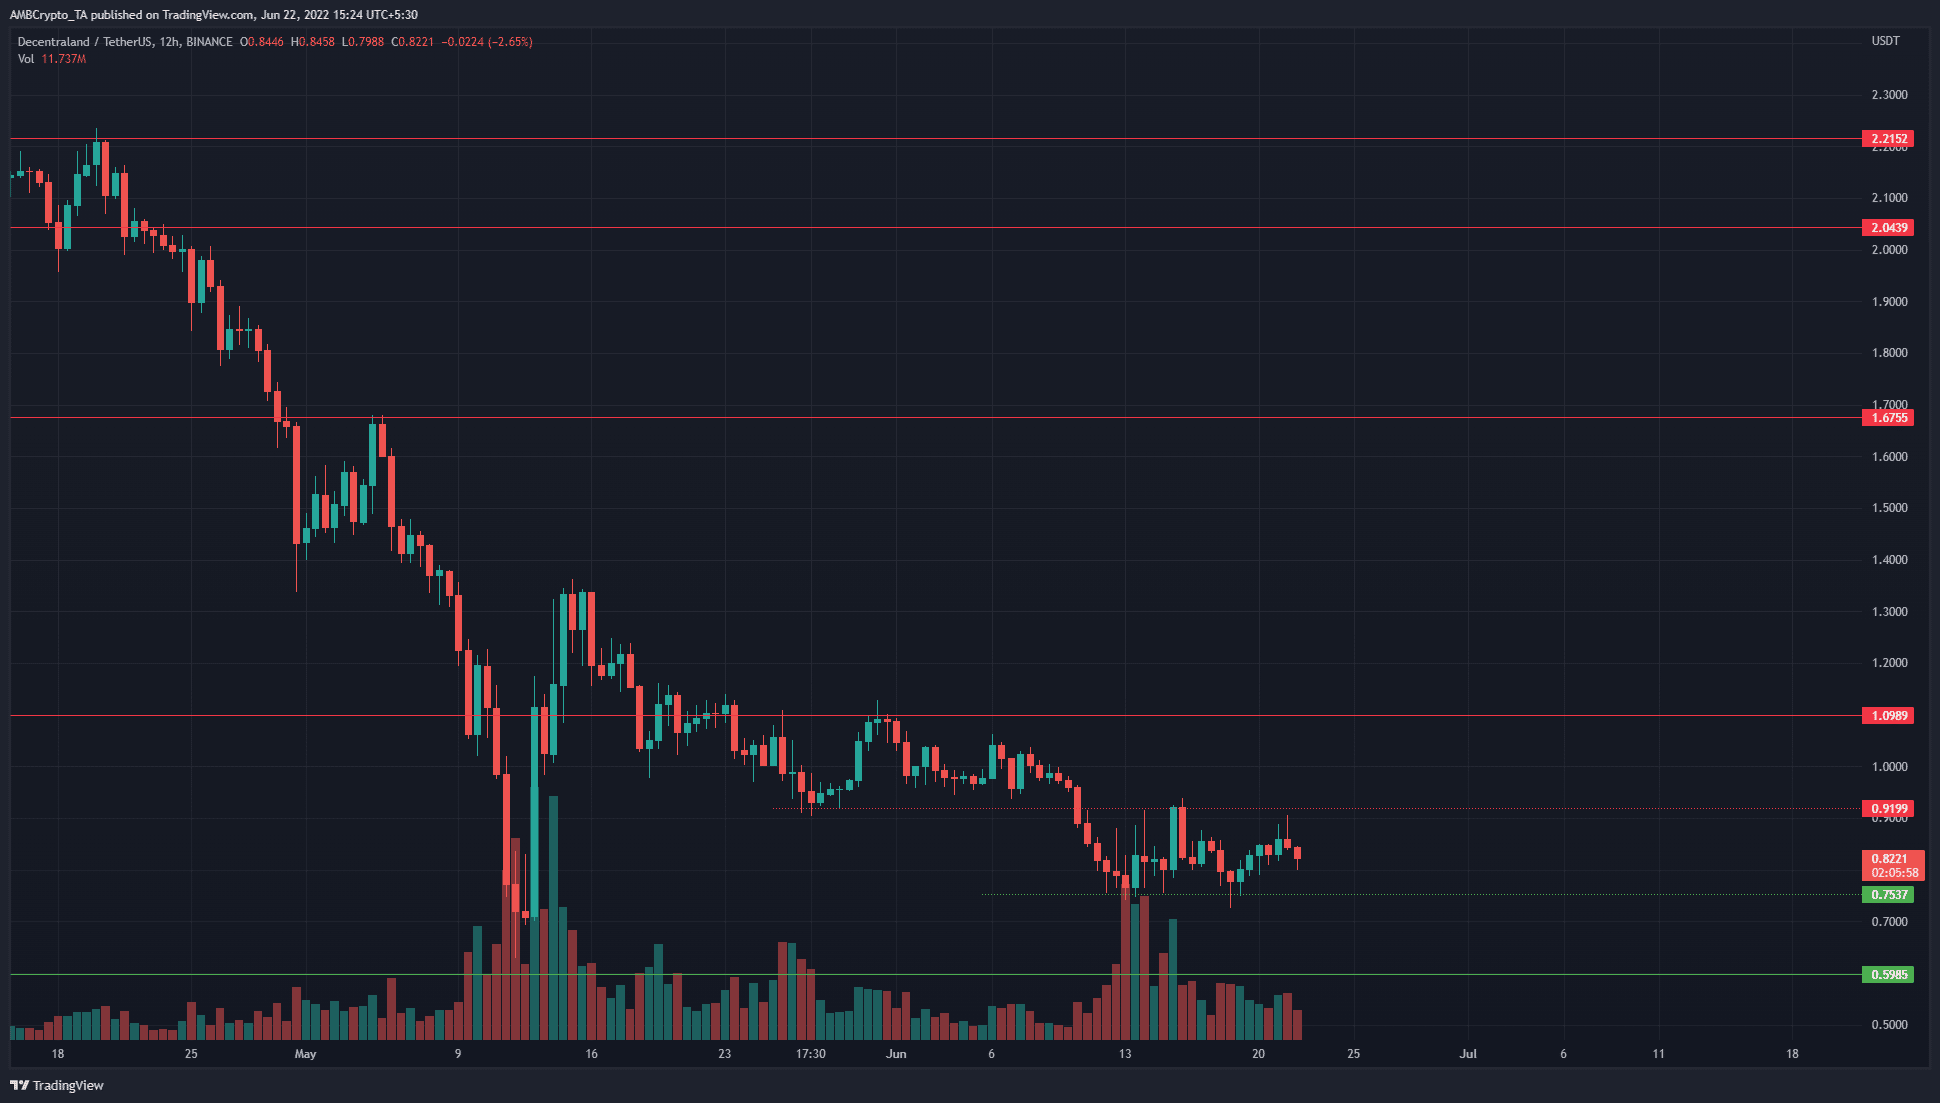 Decentraland forms a week-long range after a severe downtrend, is this the bottom?